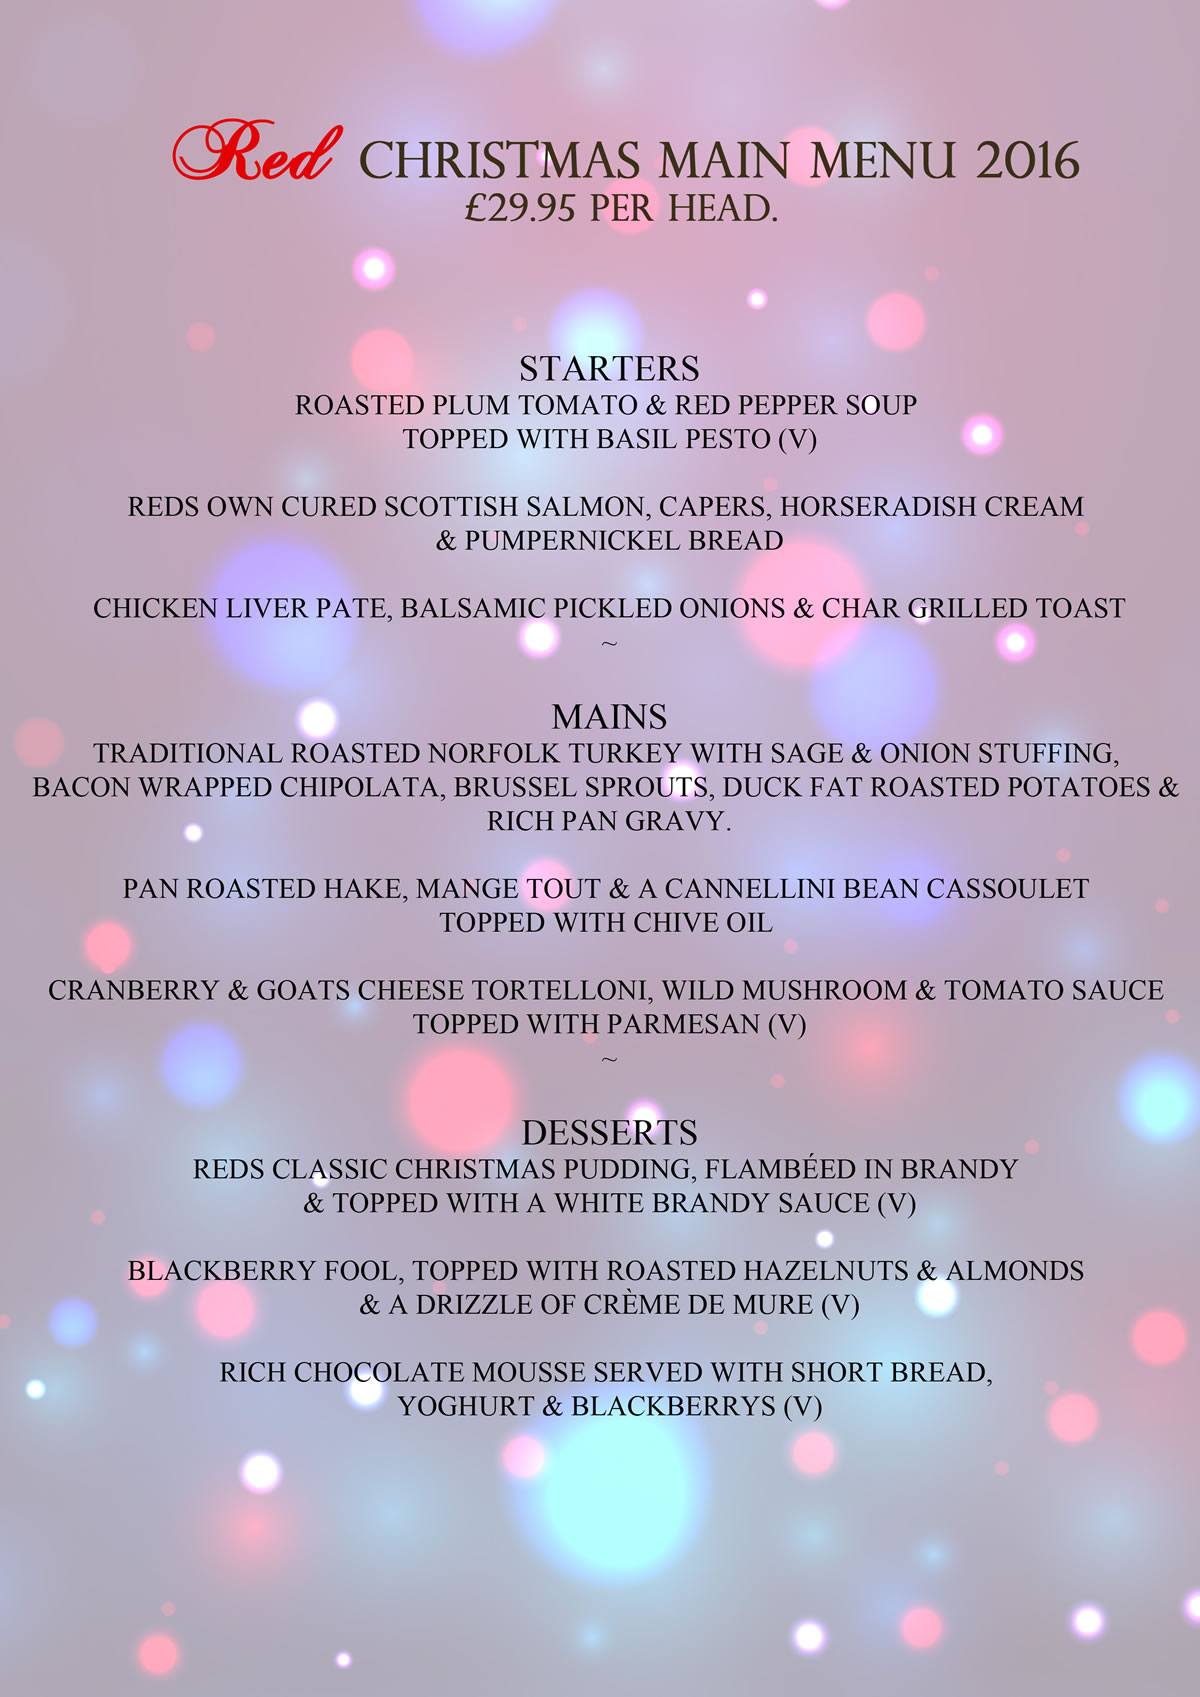 Christmas Menu at Red Weybridge includes Roast Turkey or alternative of fish and vegetarian mains dishes